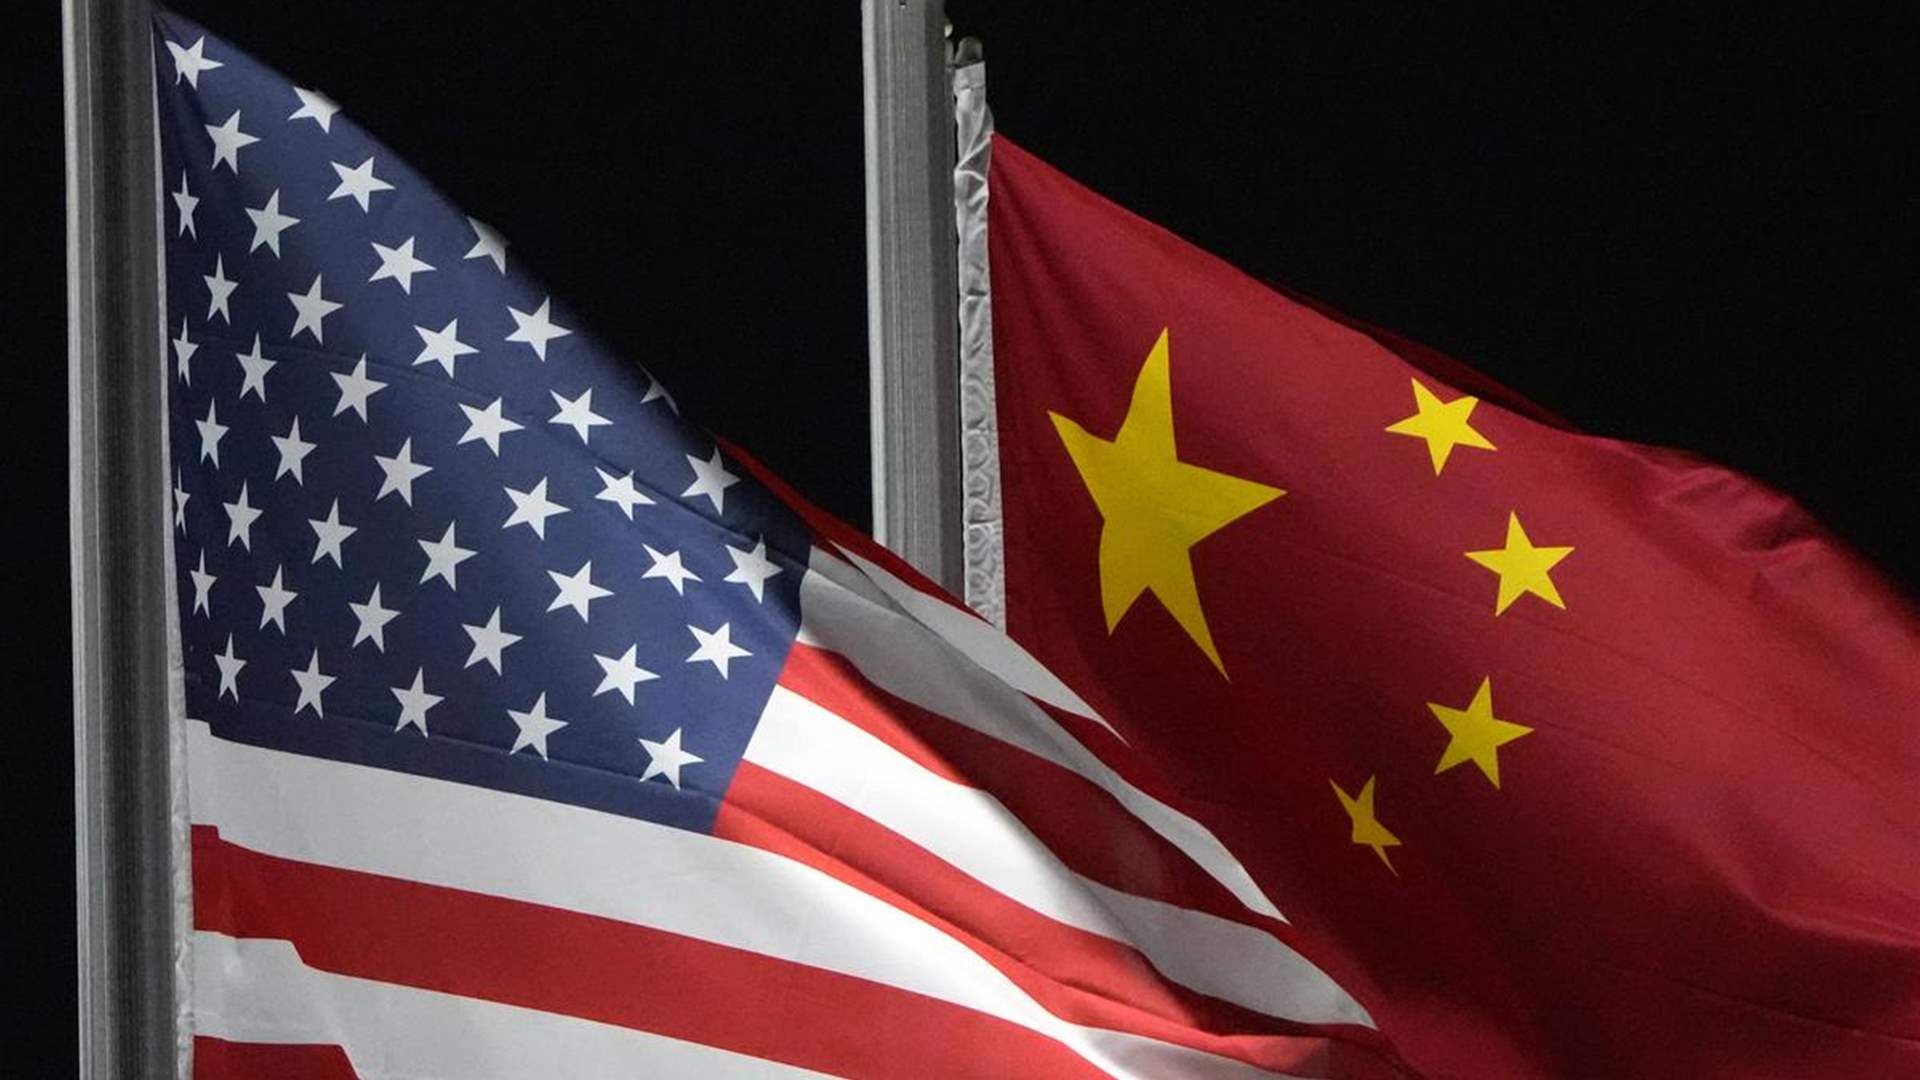 The Chinese hacker attack also affected the US Department of Commerce